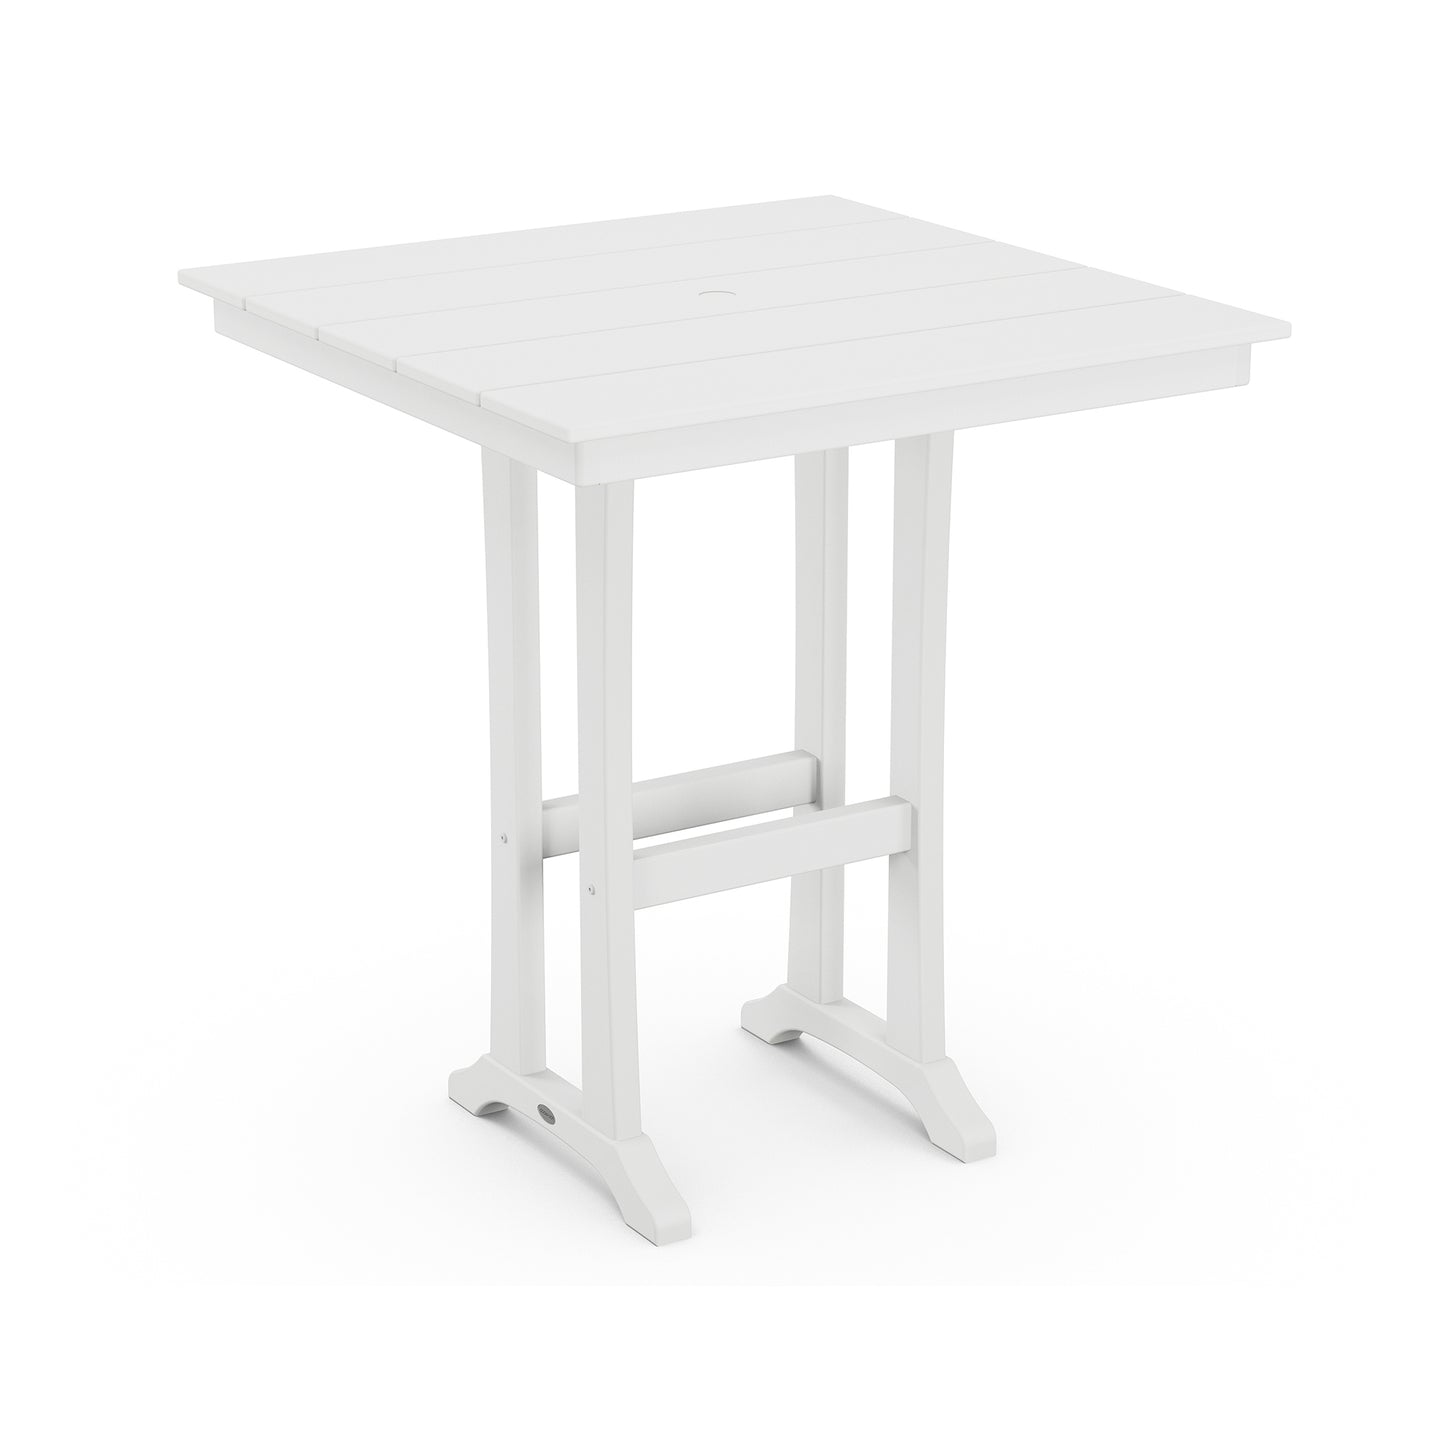 A simple white square table, crafted from POLYWOOD lumber, with a flat surface and sturdy legs, isolated on a white background.